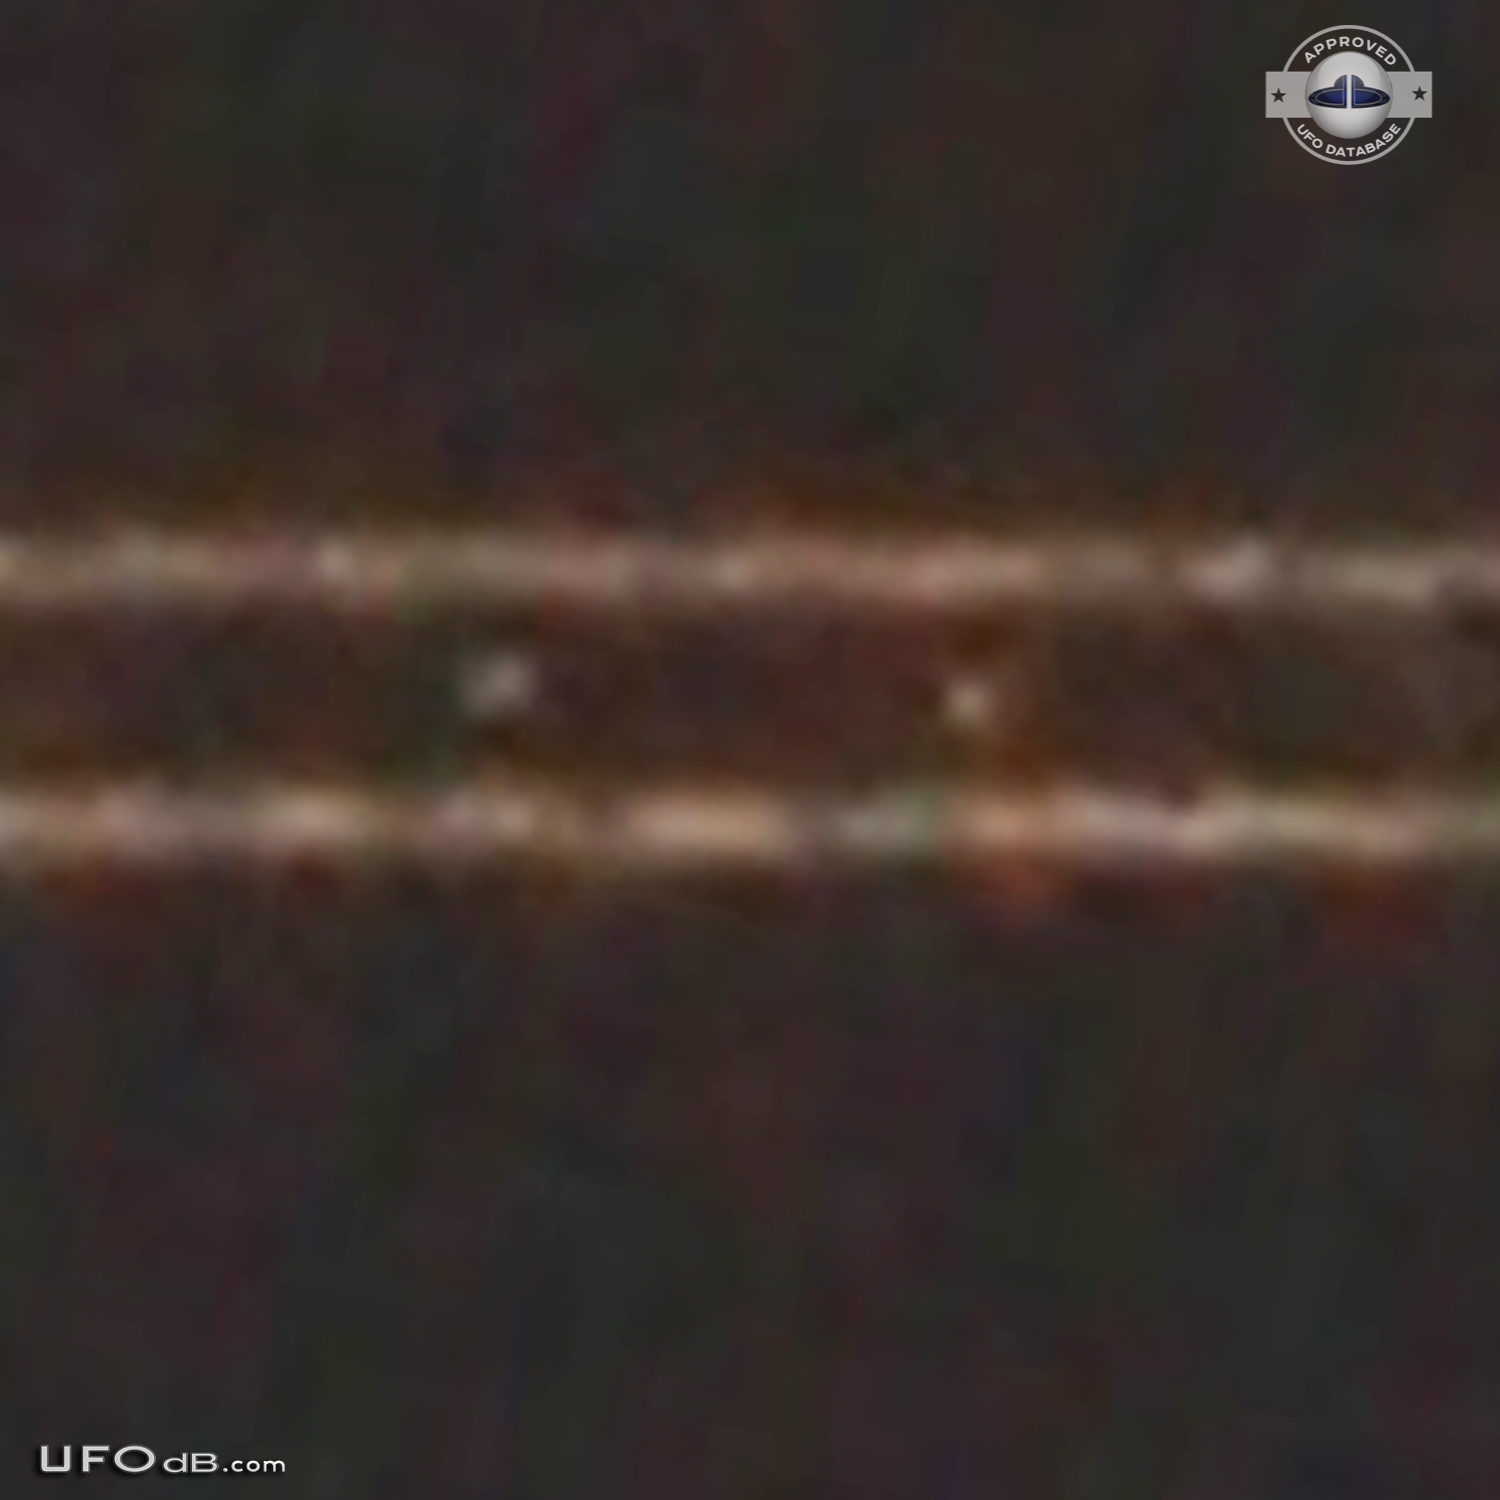 Long UFO ship in the space caught on picture over Toronto Ontario 2012 UFO Picture #514-6